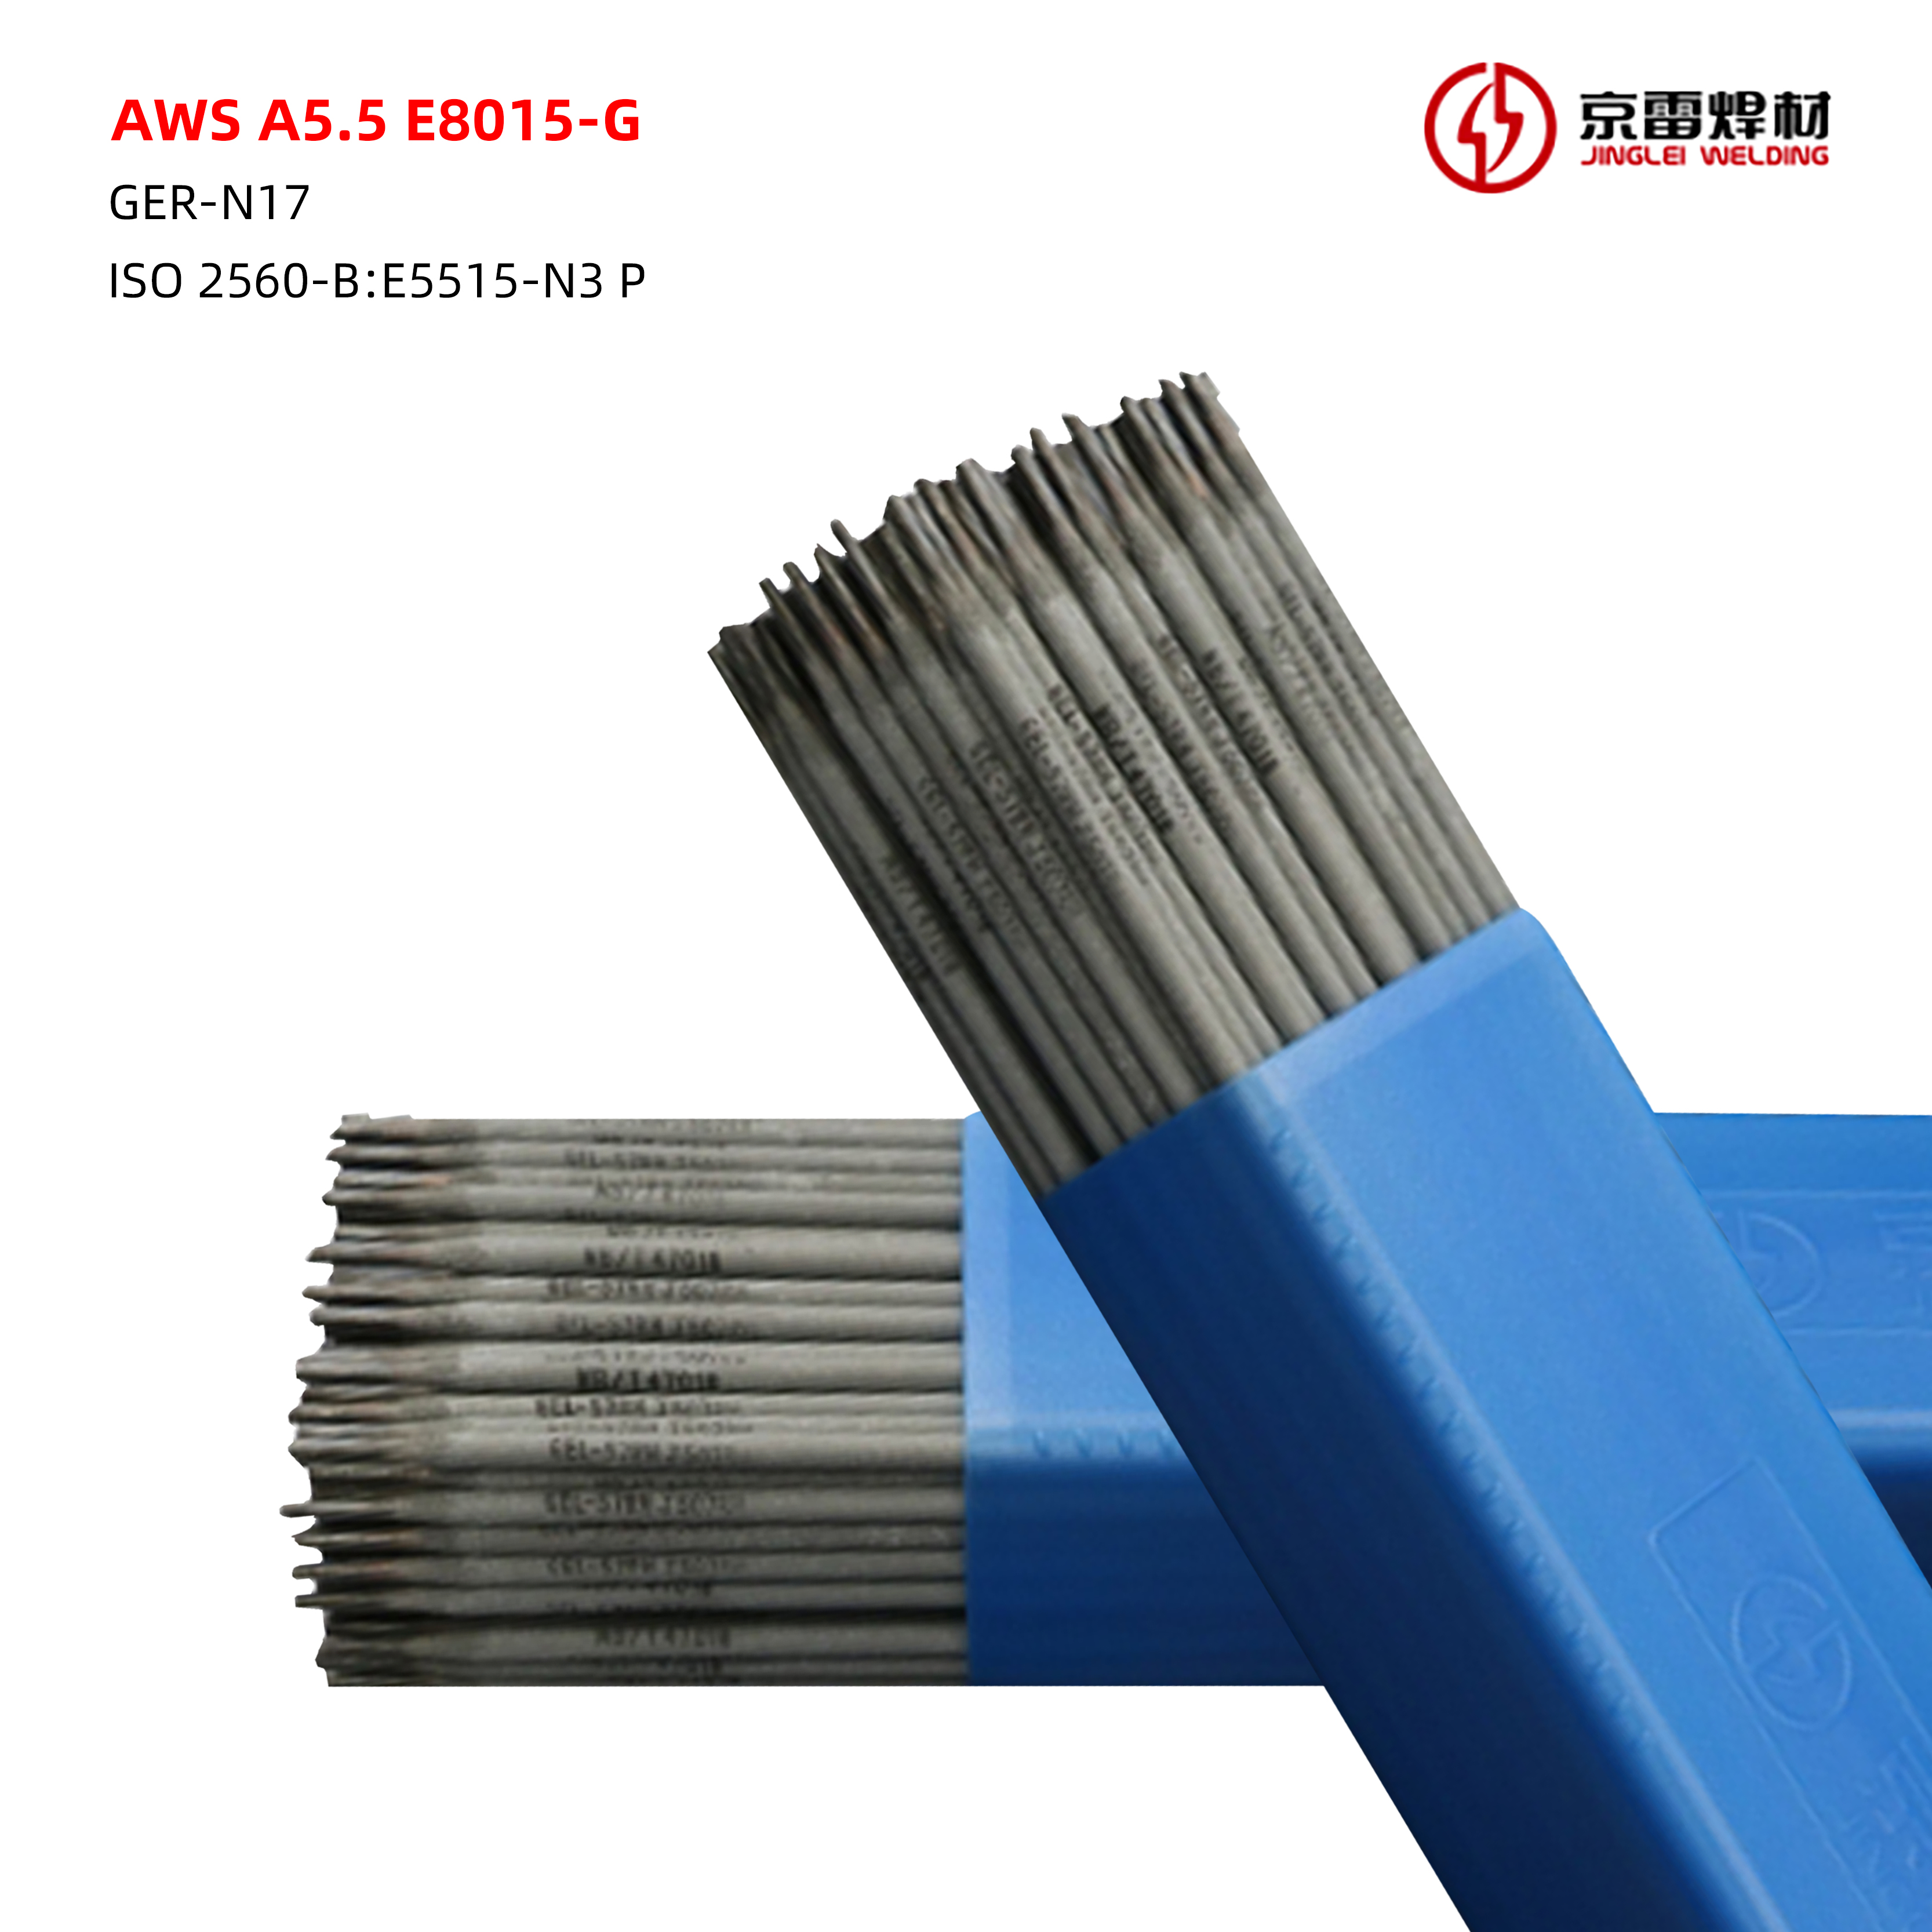 Low-Alloy Steels Manual Electrode E8015-G semi-submersible drilling platform welding wire coil